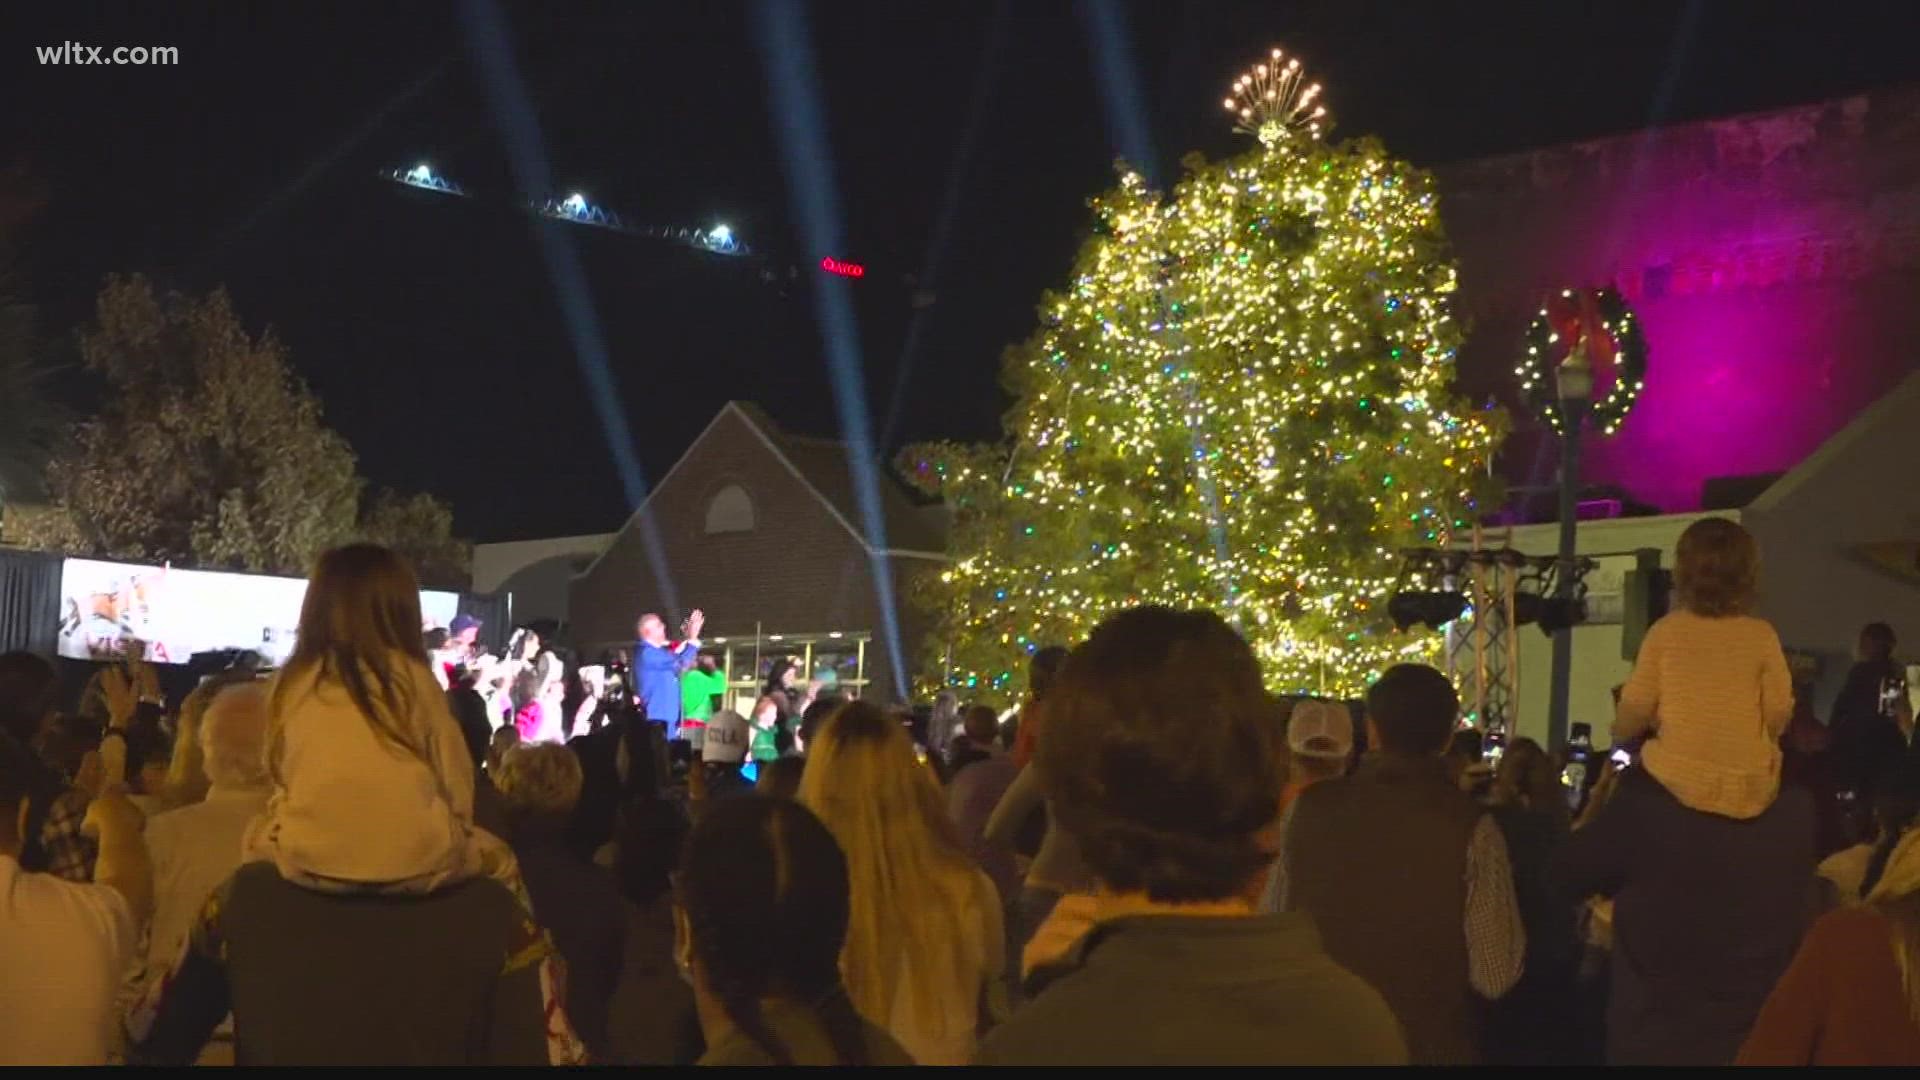 The 38th annual Vista lights celebration that included the lighting of the tree.